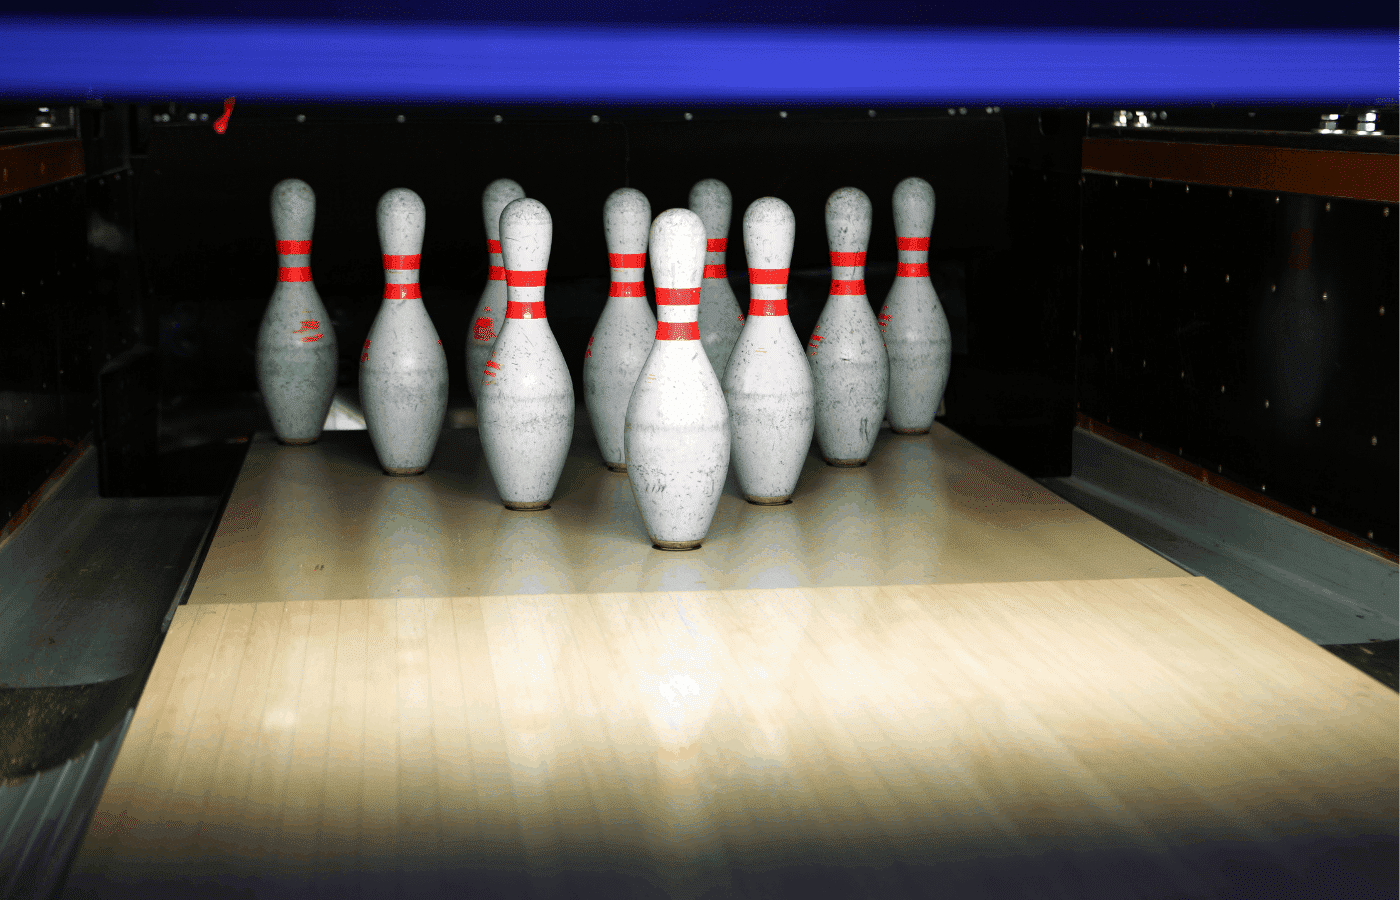 Bowling Pins Arranged When Gaming